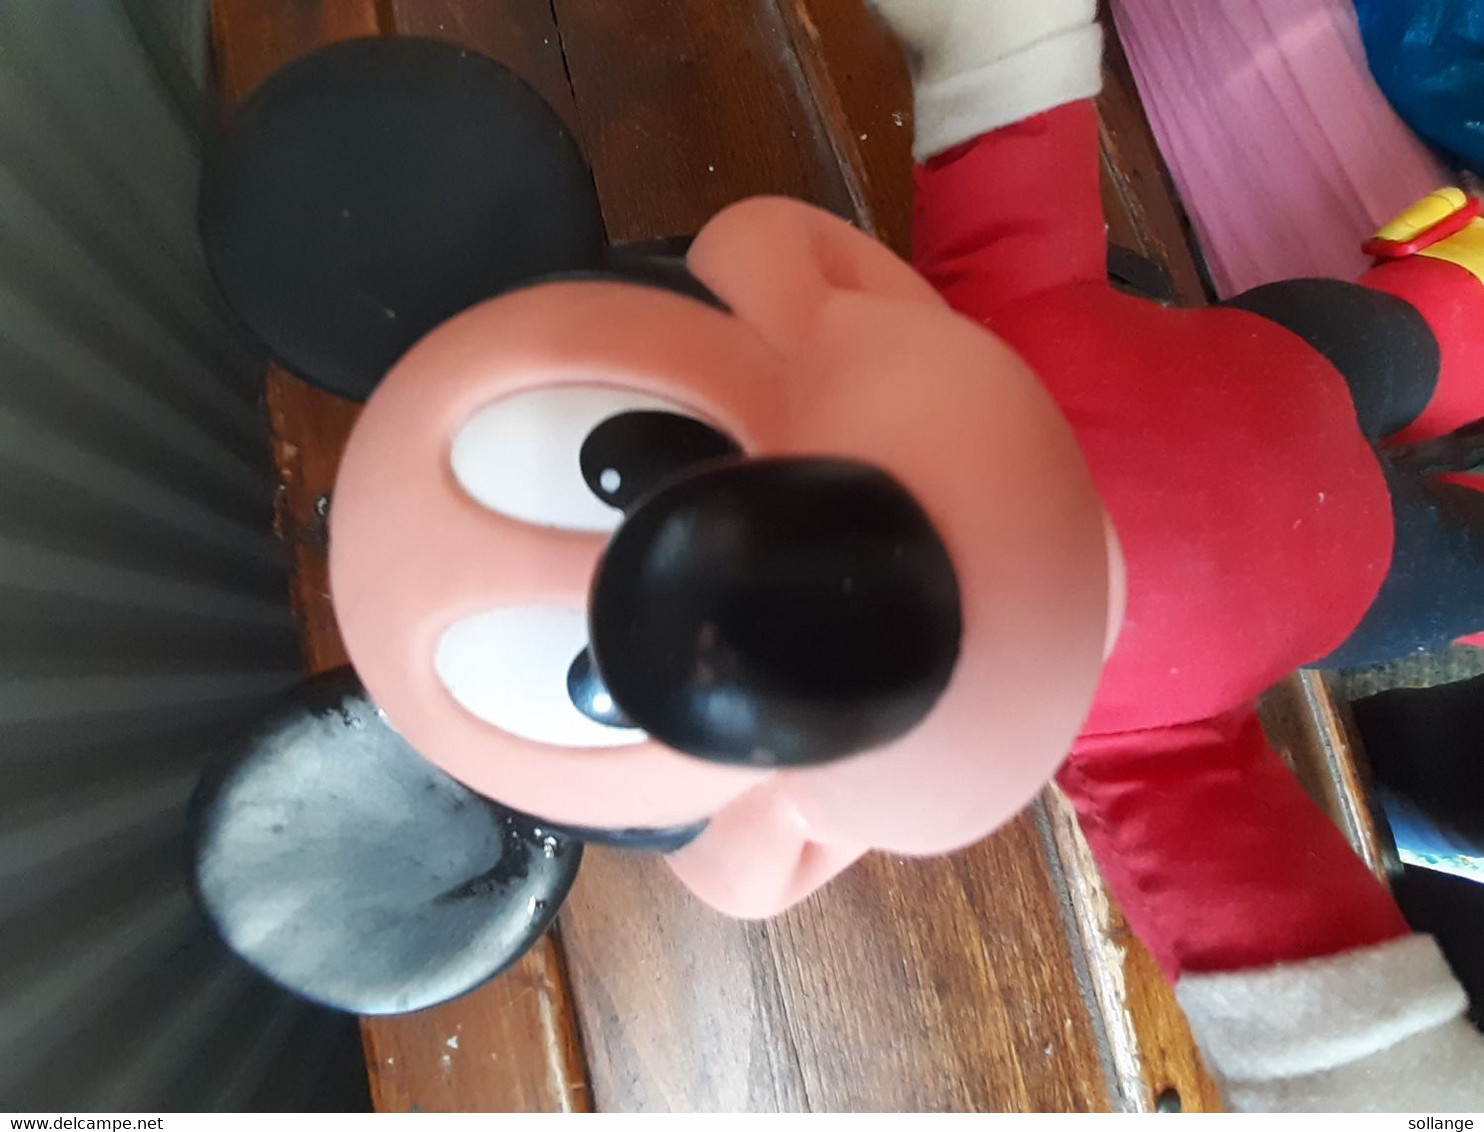 Mickey Mouse Disney Vintage - Peluches